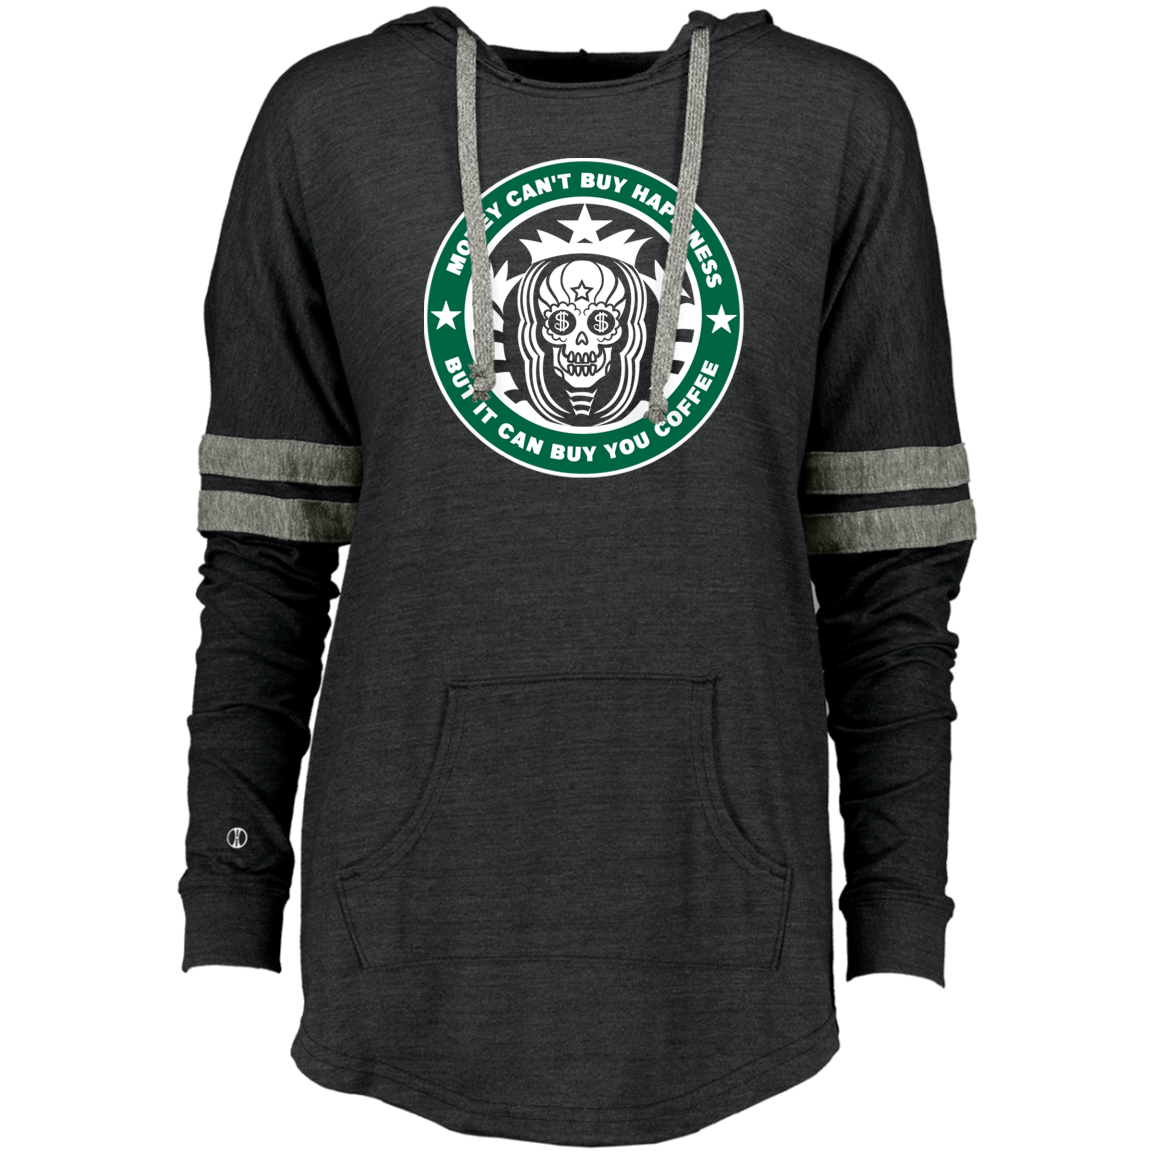 ArtichokeUSA Custom Design. Money Can't Buy Happiness But It Can Buy You Coffee. Ladies' Hooded Low Key Pullover